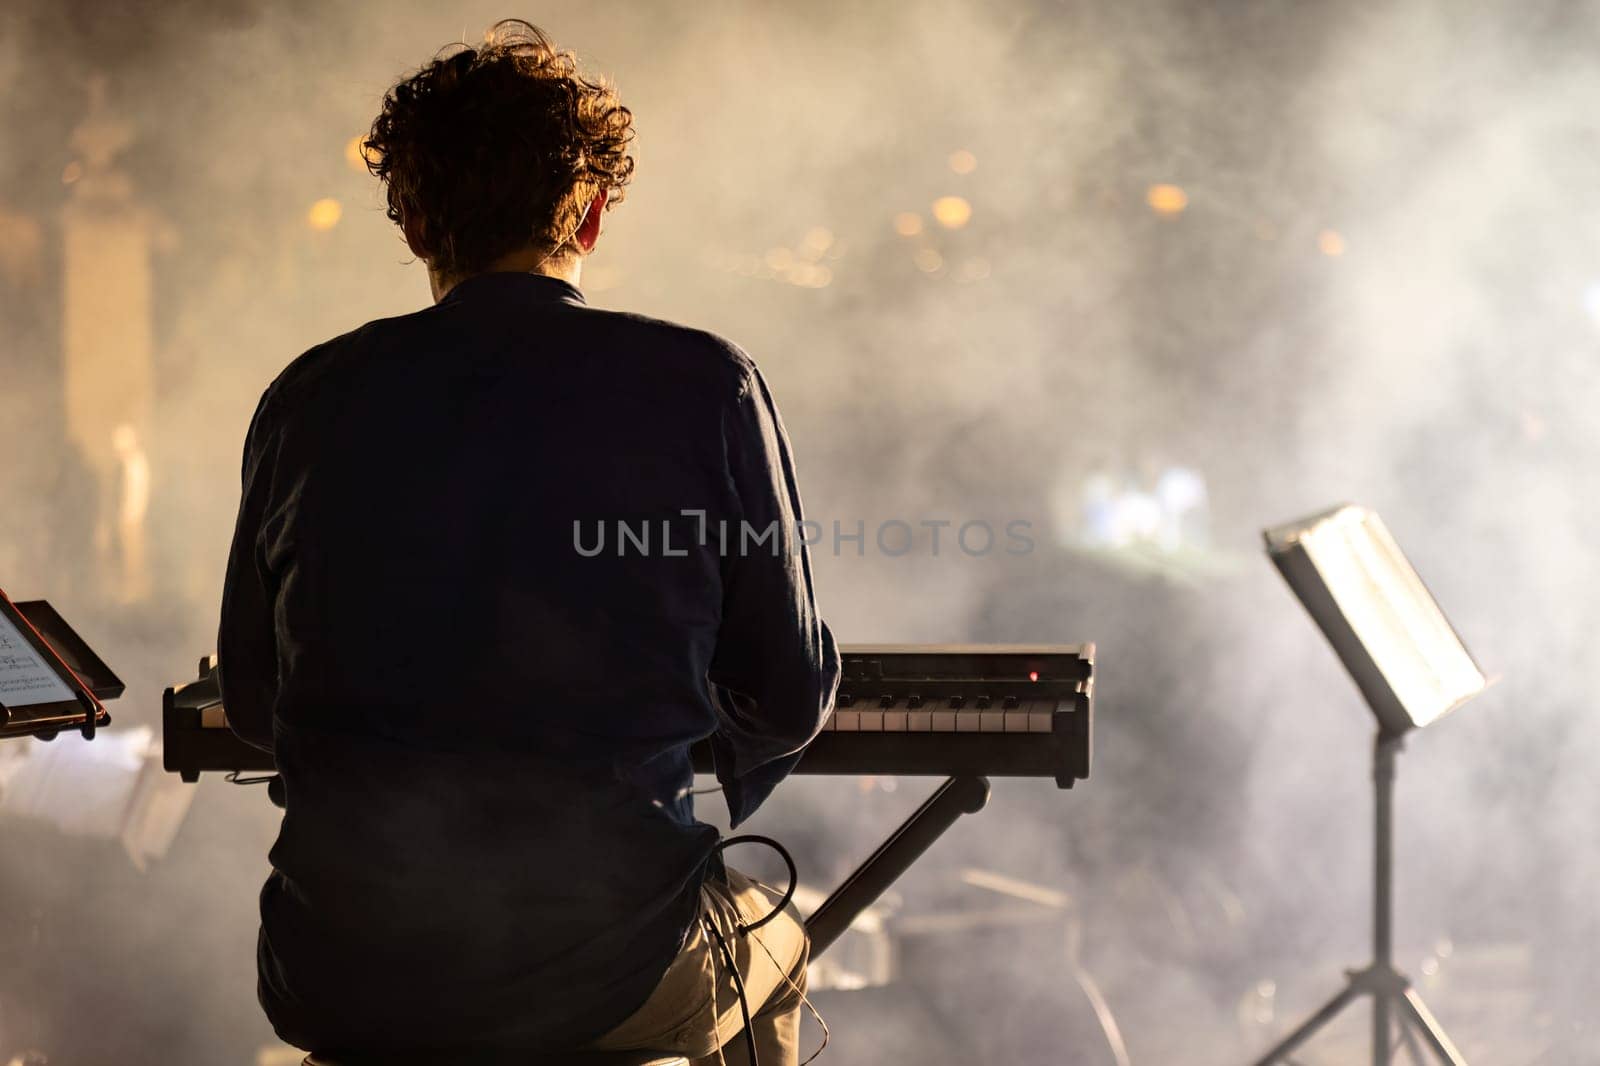 A pianist seen from behind, playing in a night concert with a mystical foggy atmosphere.